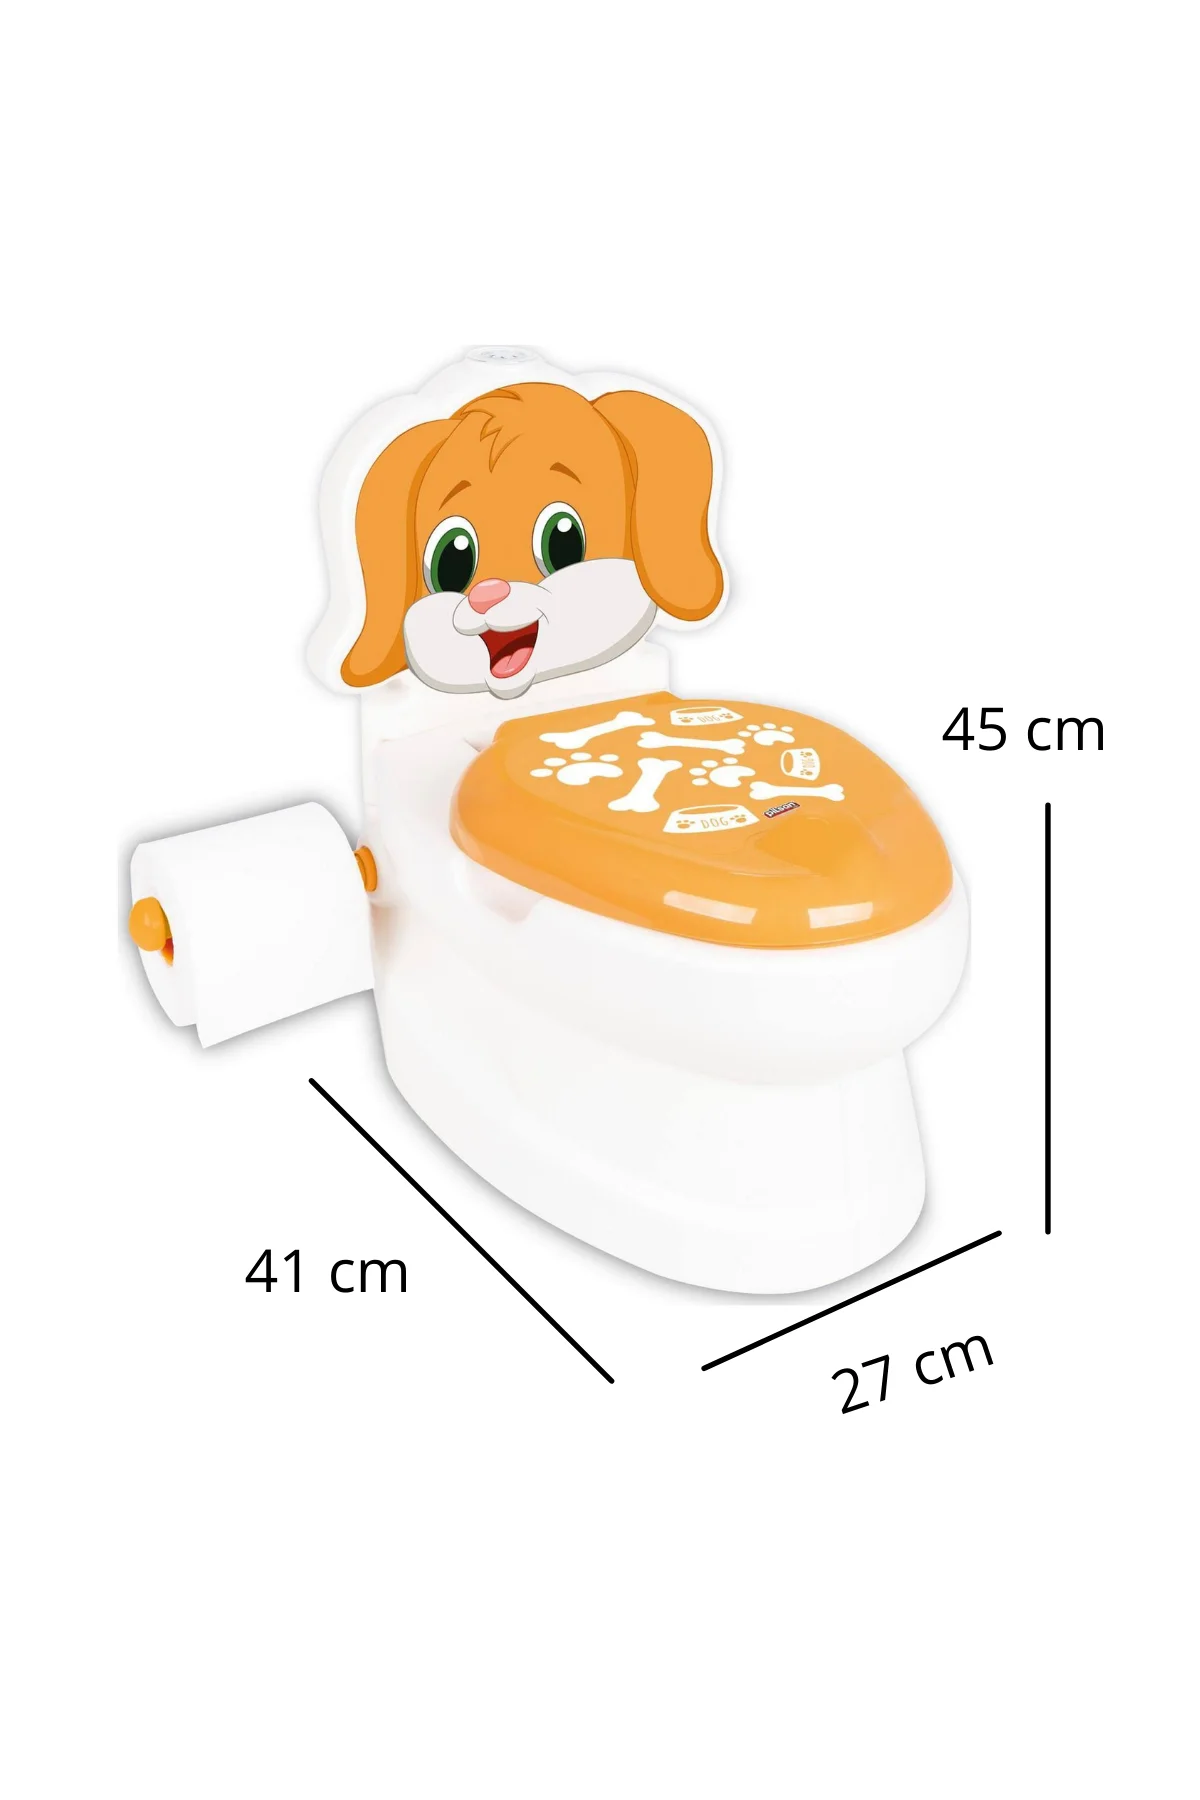 Musical Potty For Kids Portable Baby Potty Plastic Road Pot Infant Cute Toilet Seat Baby Boys And Girls Potty Trainer seat WC enlarge